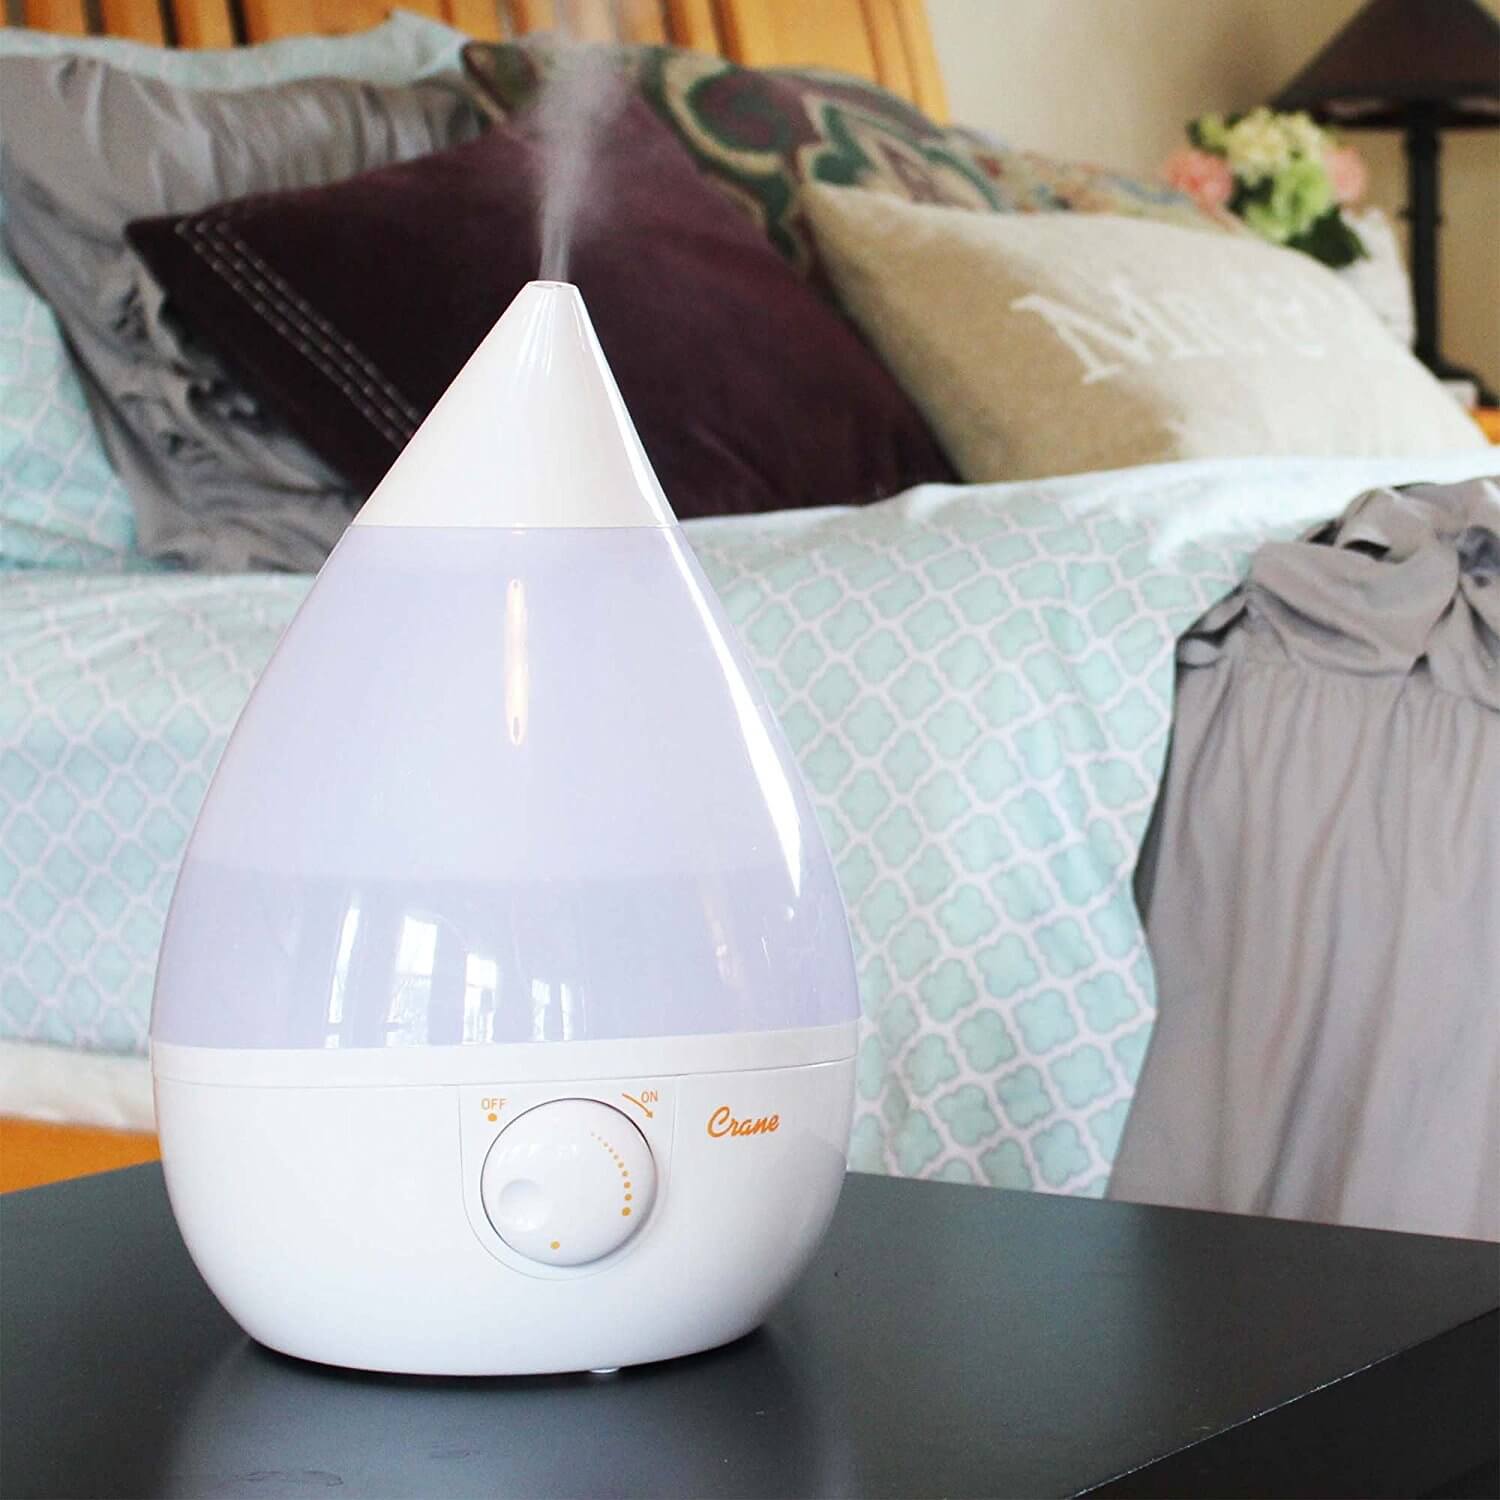 Wellness Inside the Home Assured with a Personal Humidifier